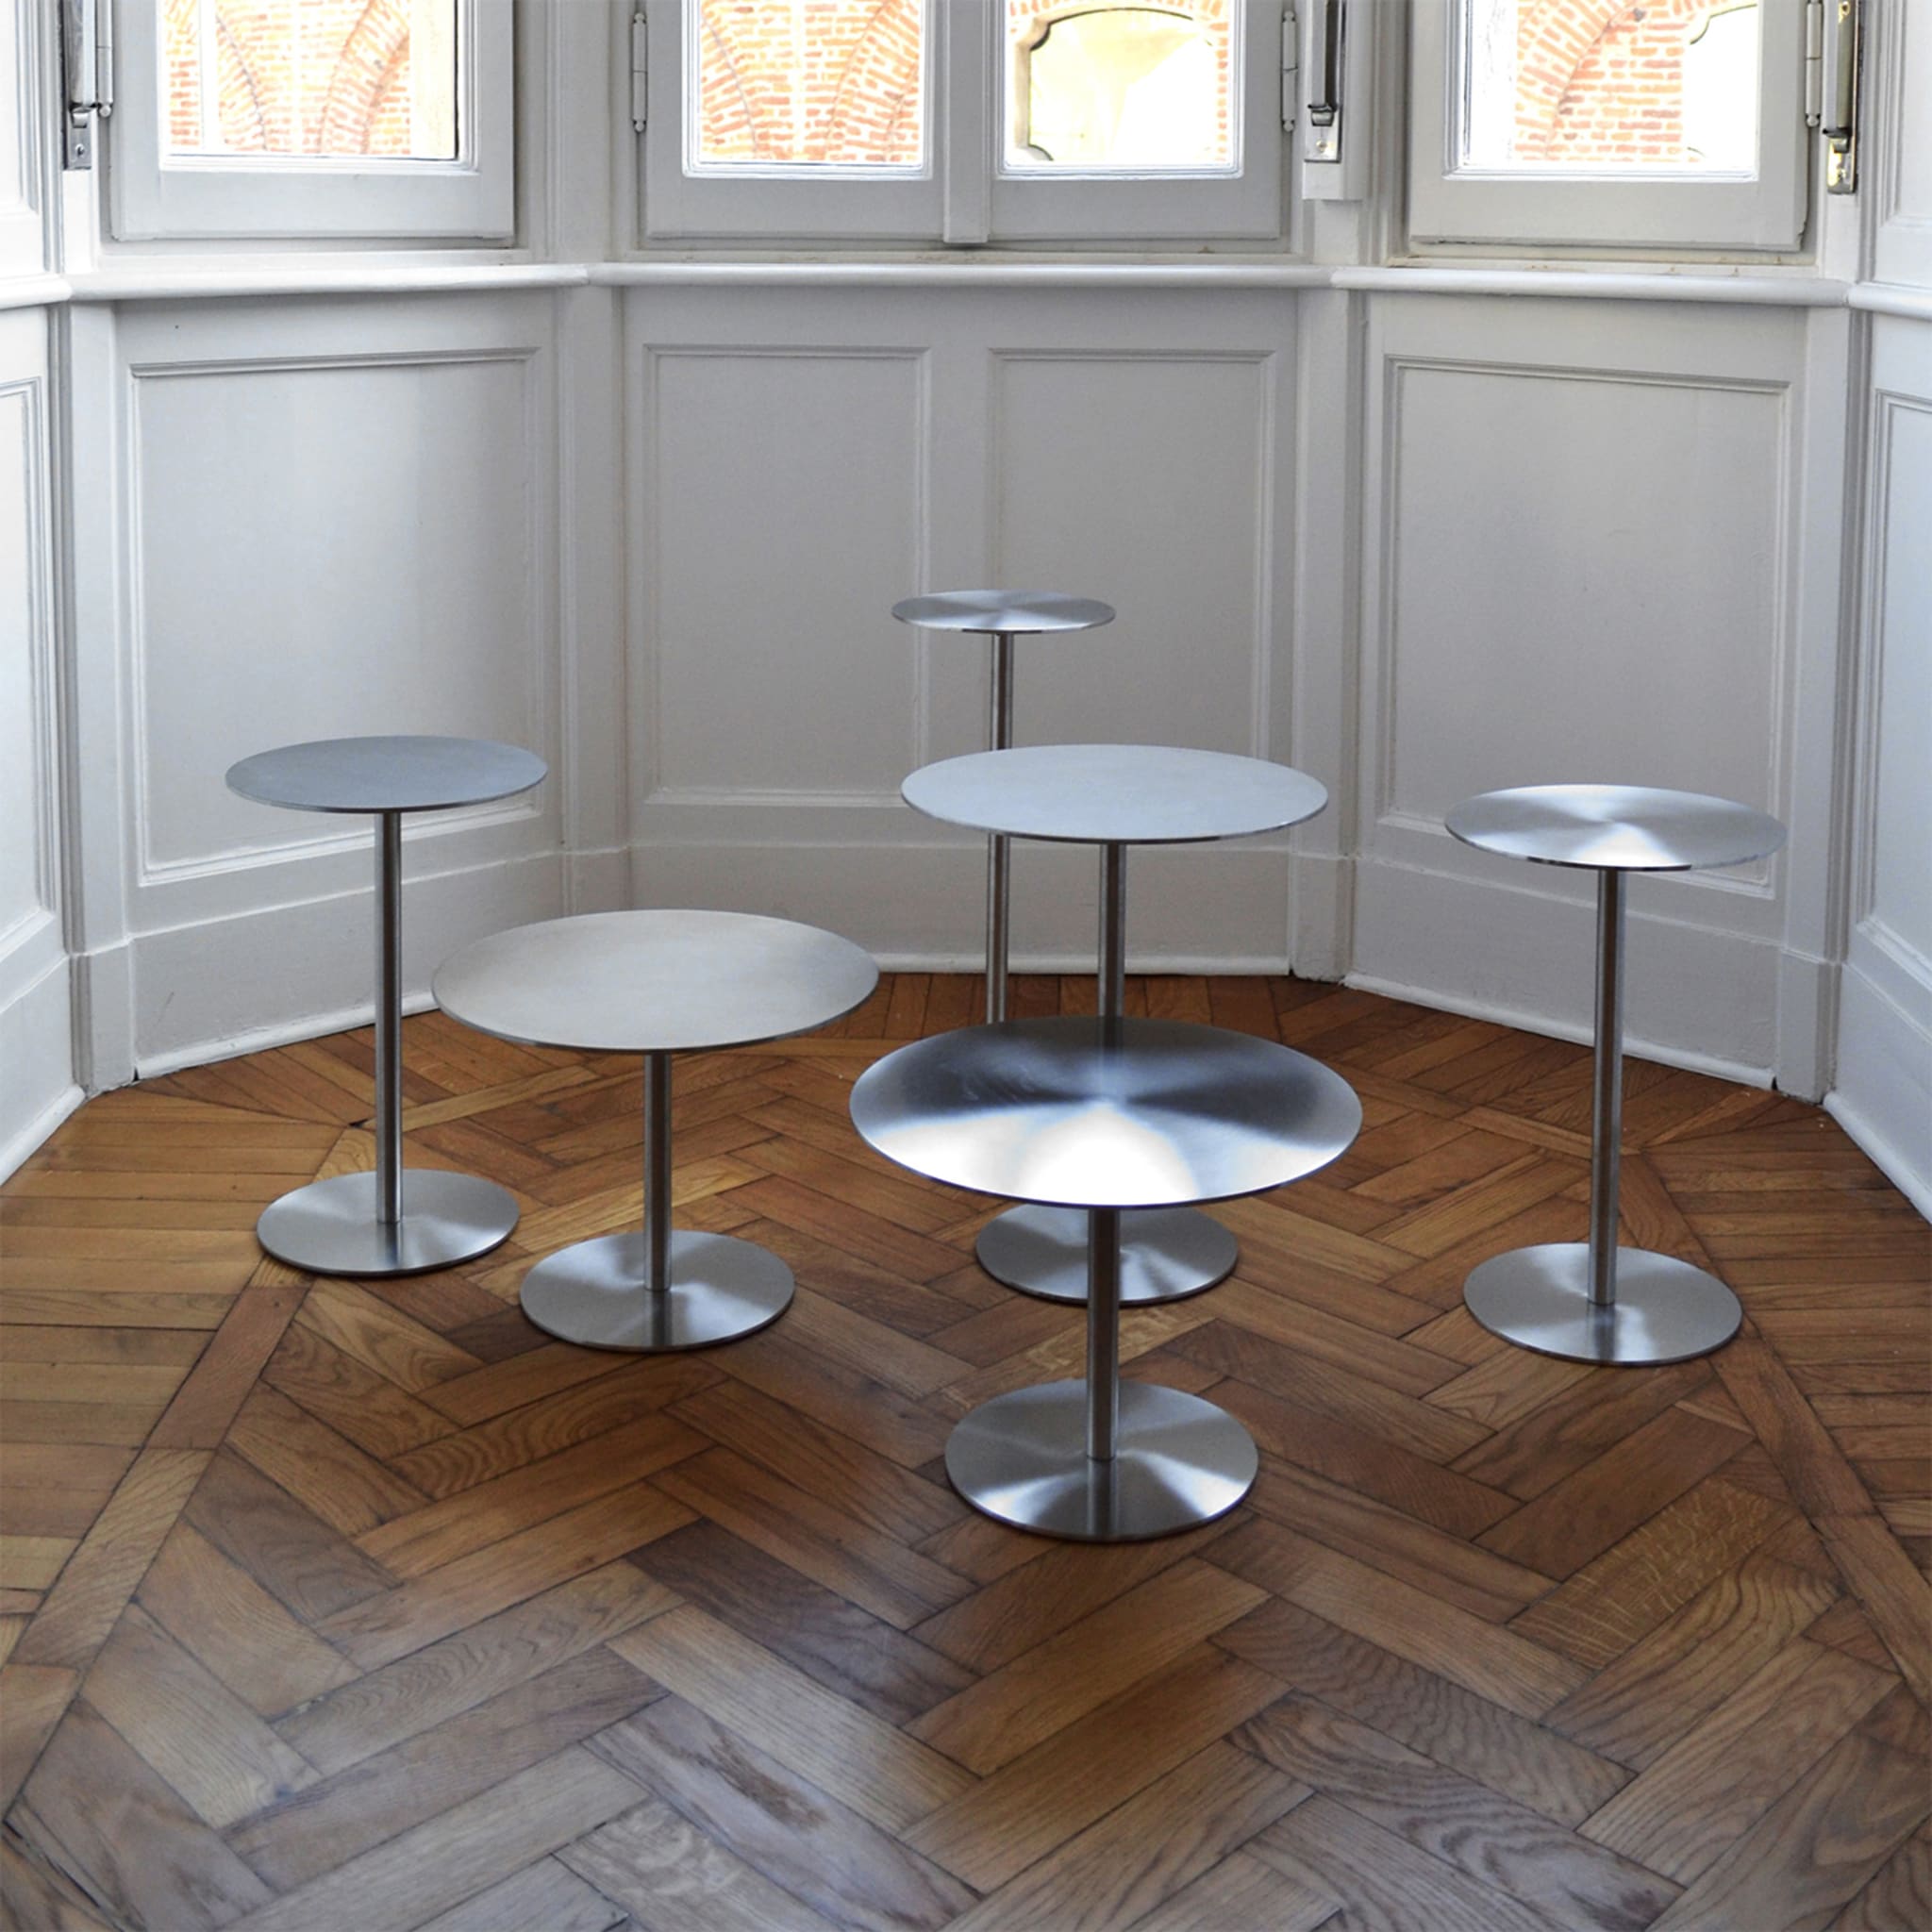 Ester Stainless Steel Table - Alternative view 1